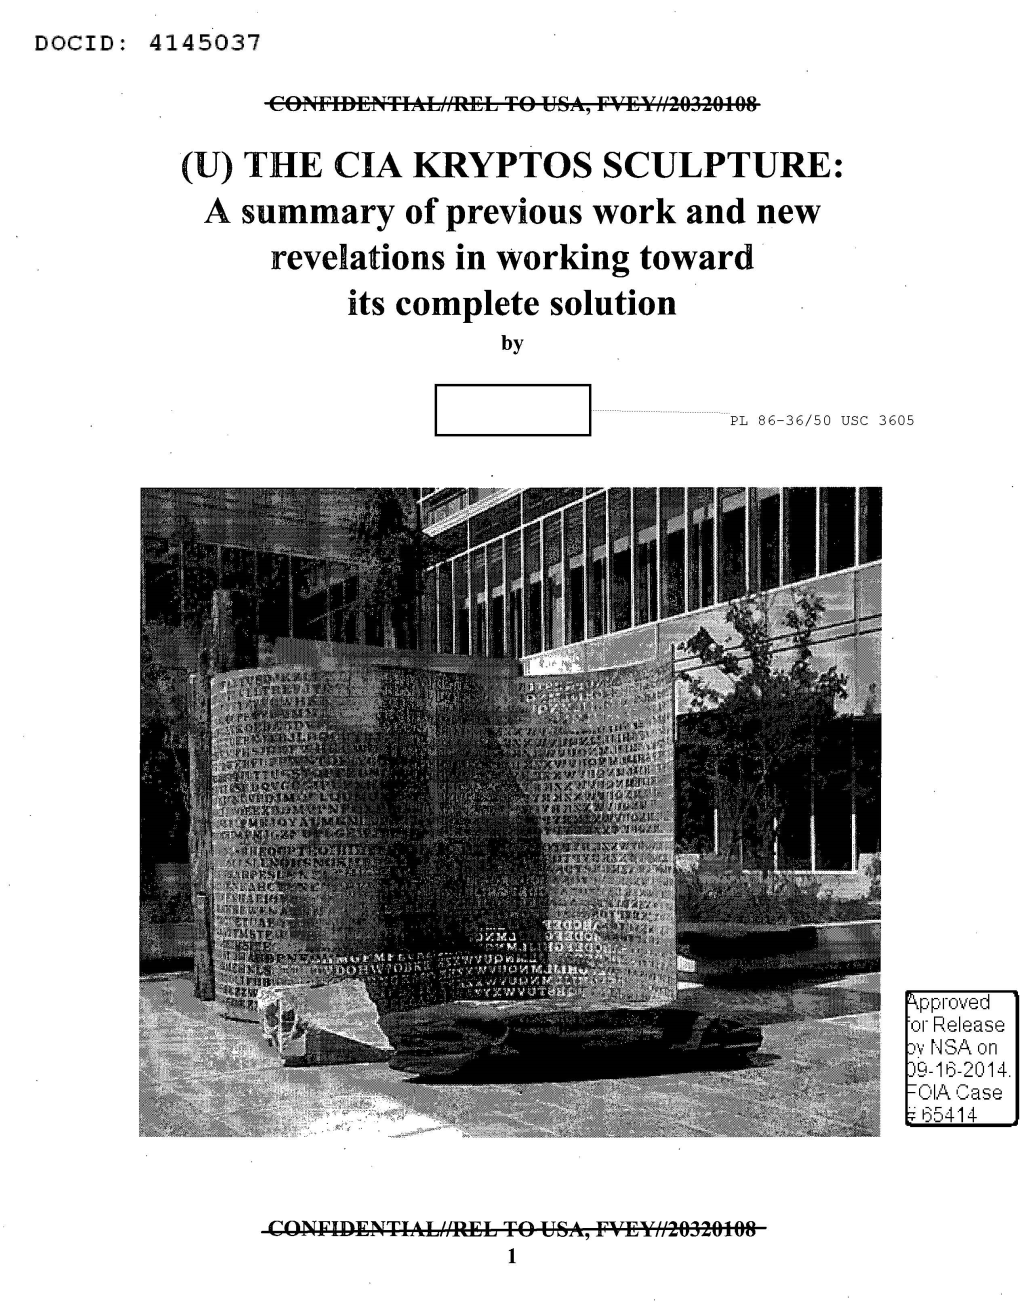 THE CIA KRYPTOS SCULPTURE: a Summary of Previous Work and New Revelations in Working Toward Its Complete Solution By